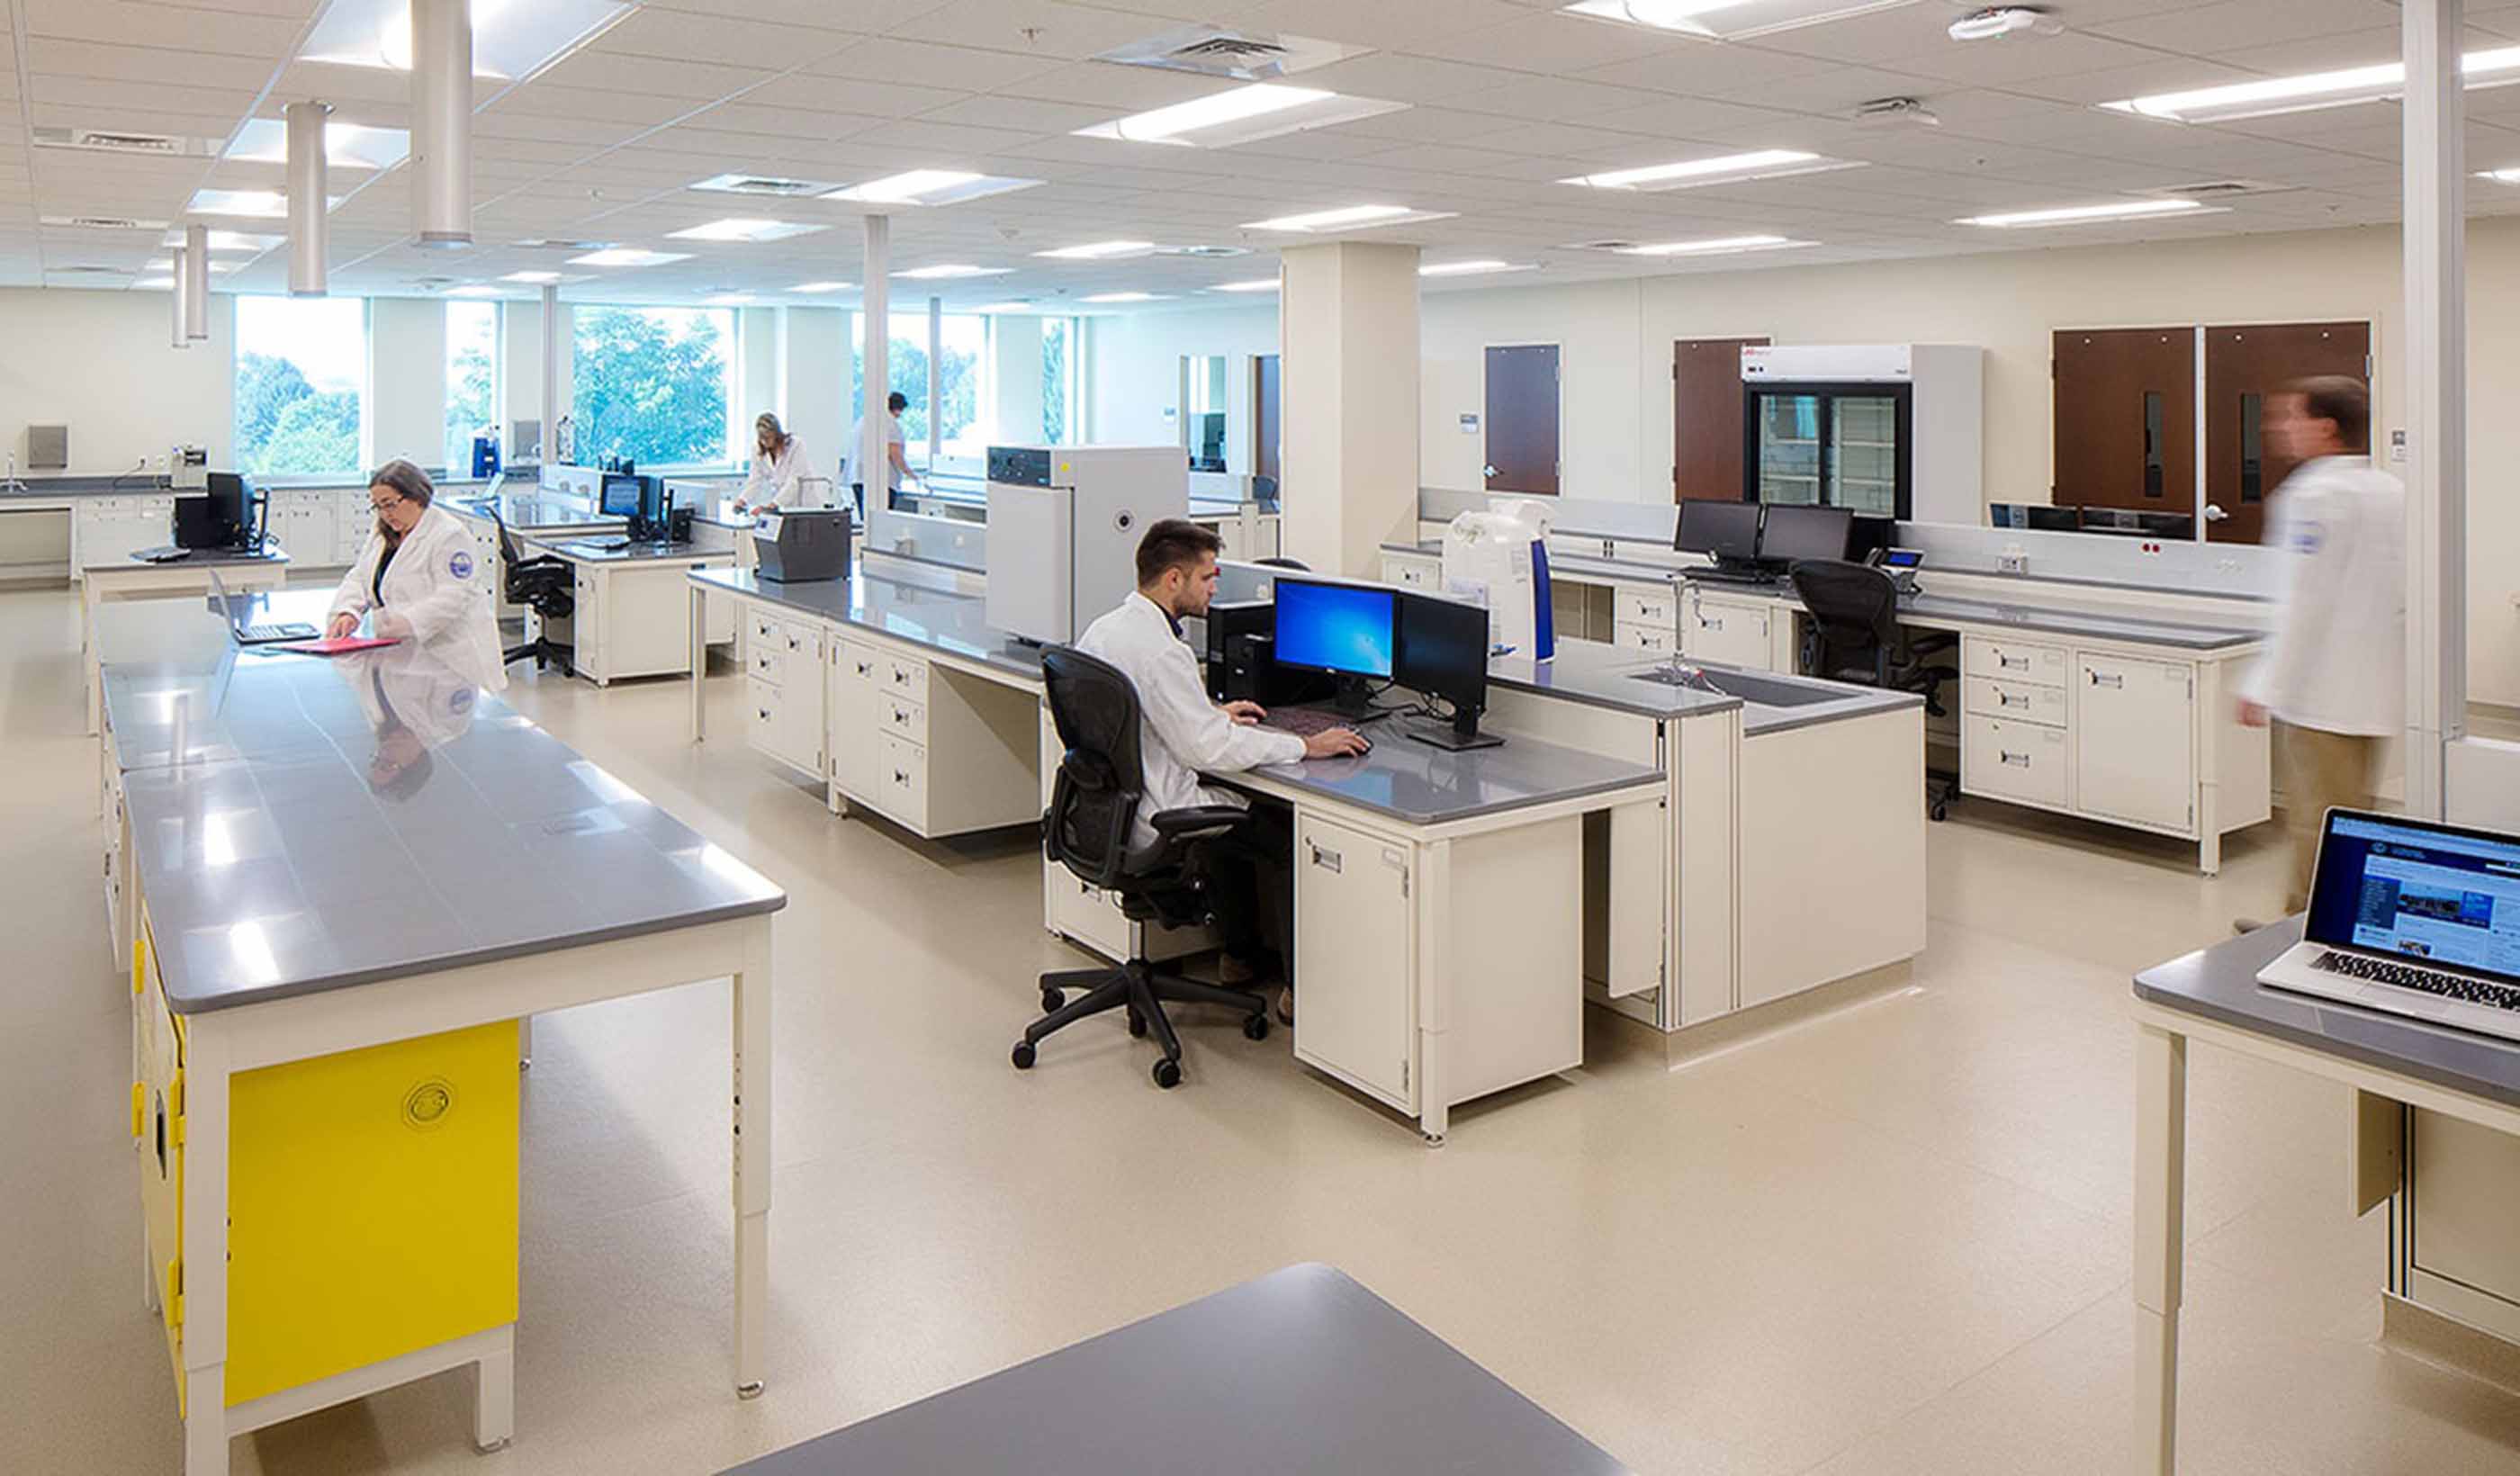 What to consider when converting commercial or office space to life-science use